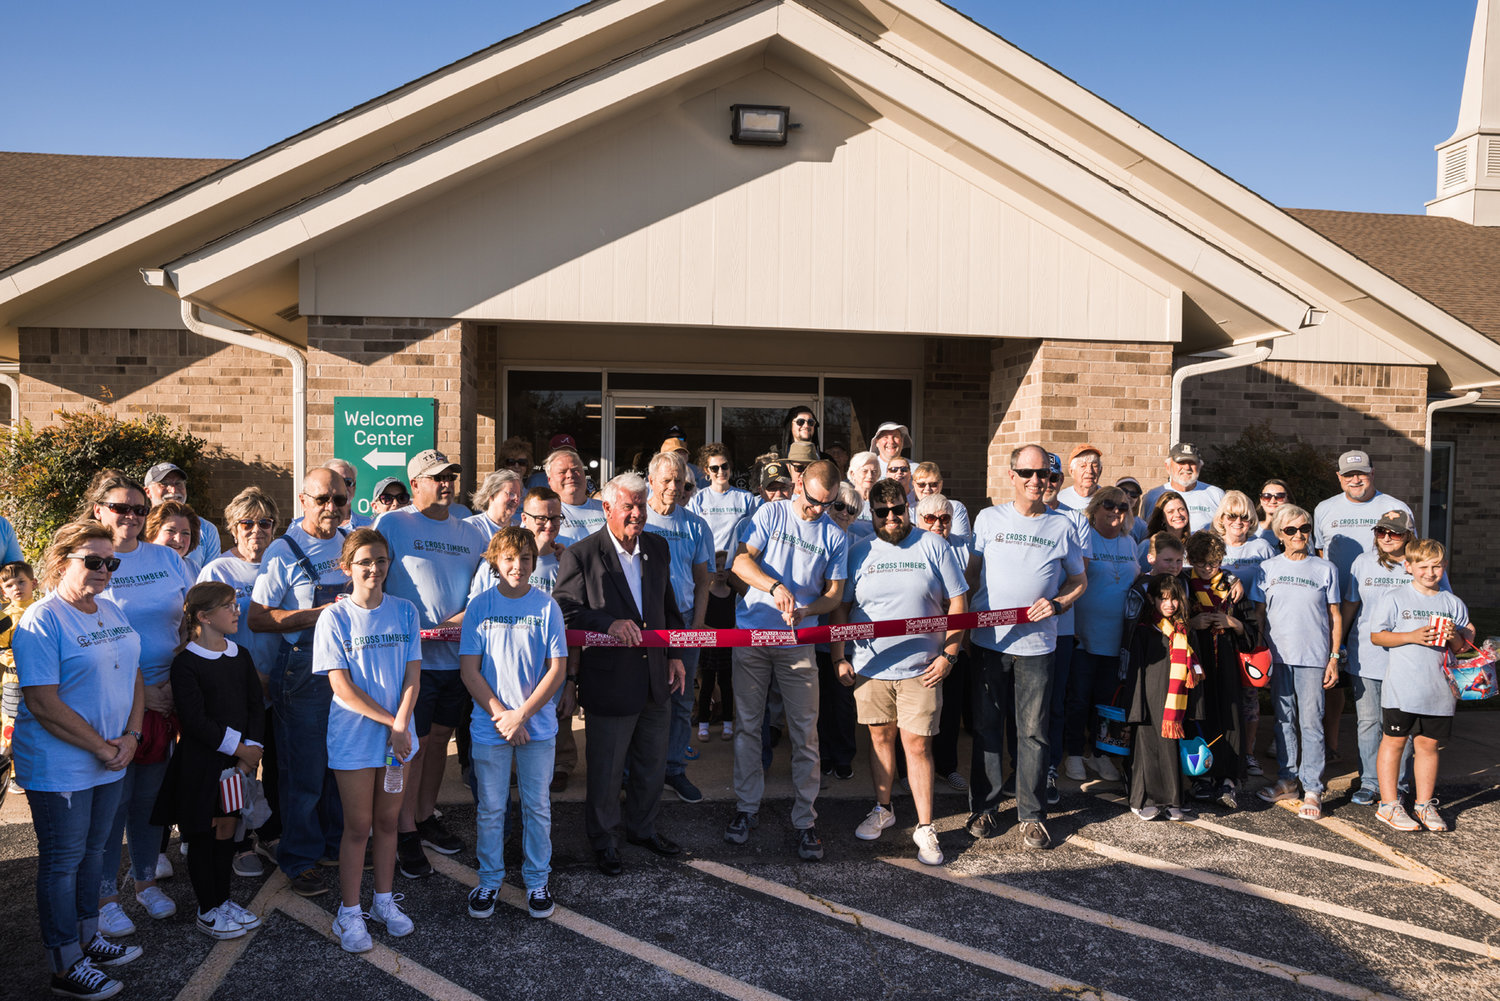 The Cross Timbers Baptist Church celebrated its new name with a ribbon cutting on Sunday, Oct. 23.